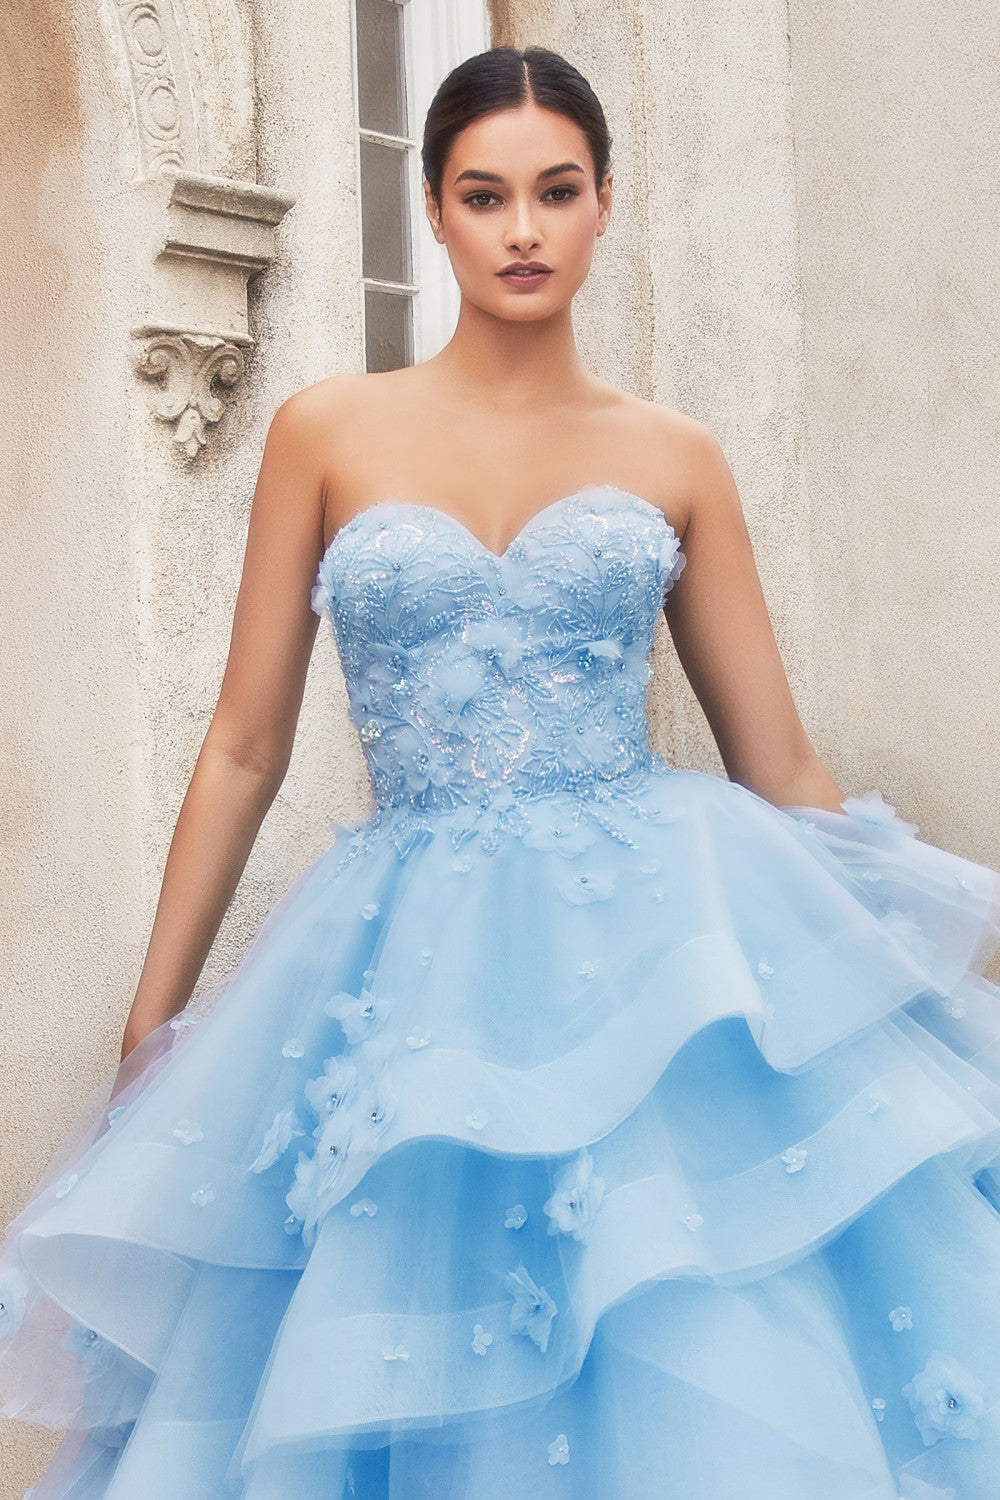 PEONY PETAL COUTURE LAYERED BALL GOWN ALA1220 Elsy Style All dresses